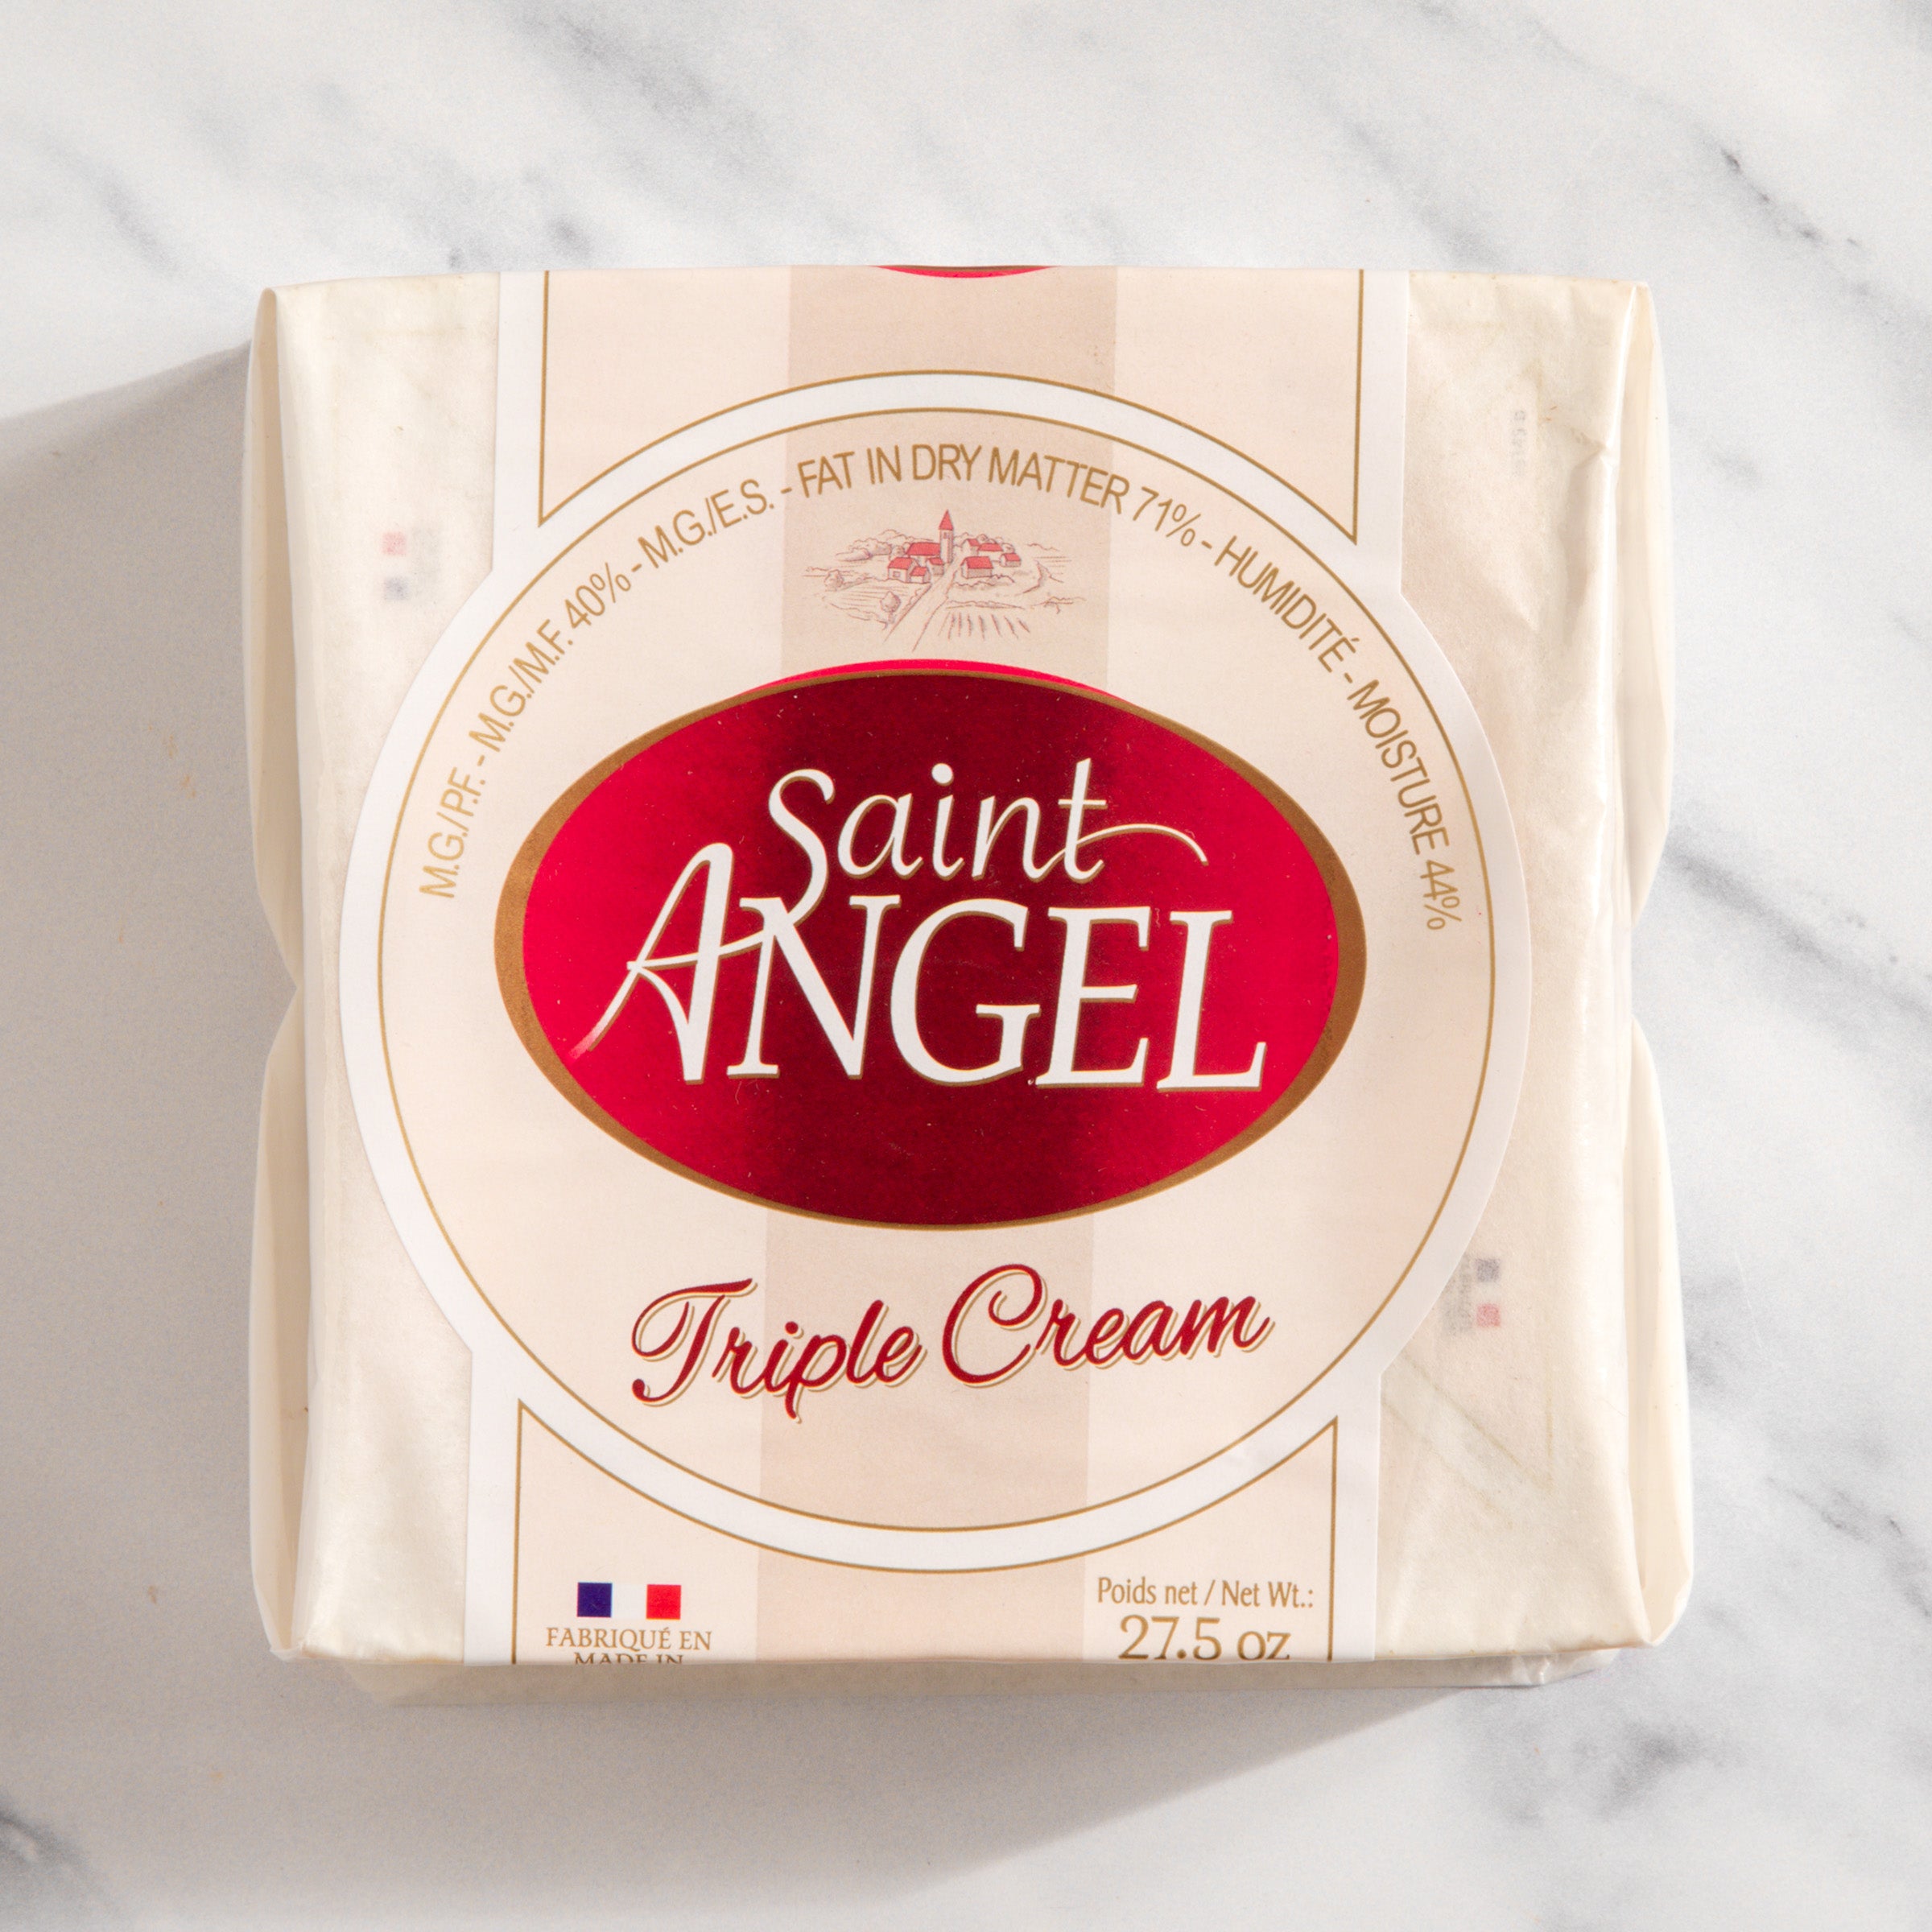 igourmet_7702_Saint Angel Triple Creme_Fromagerie Guilloteau_Cheese